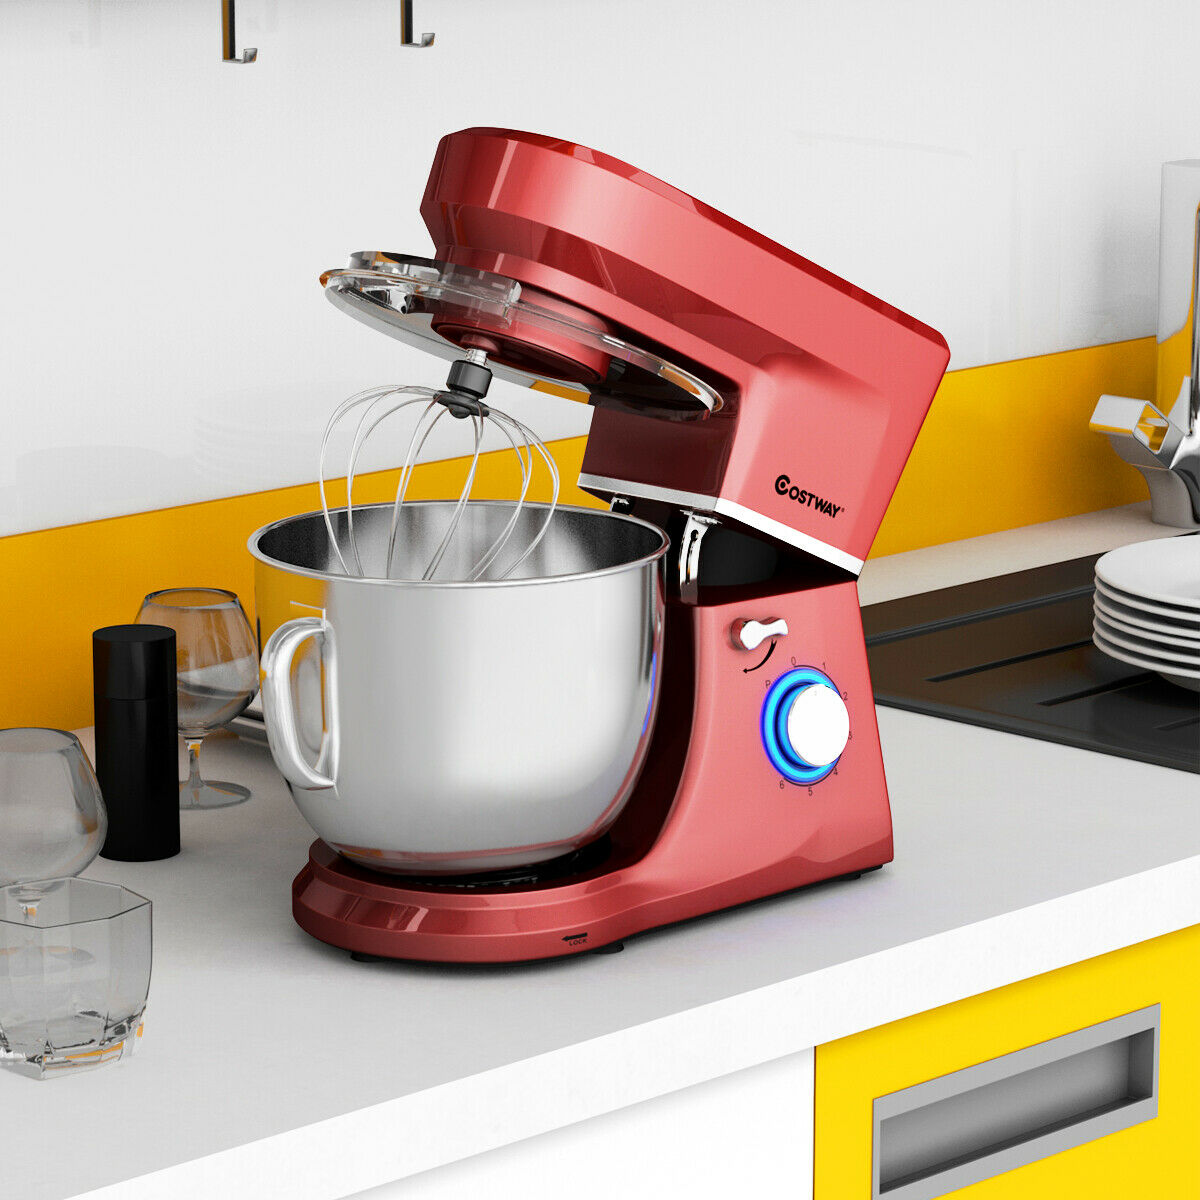 Costway Tilt-Head Stand Mixer 7.5 Qt 6 Speed 660W with Dough Hook, Whisk & Beater Red - image 3 of 10